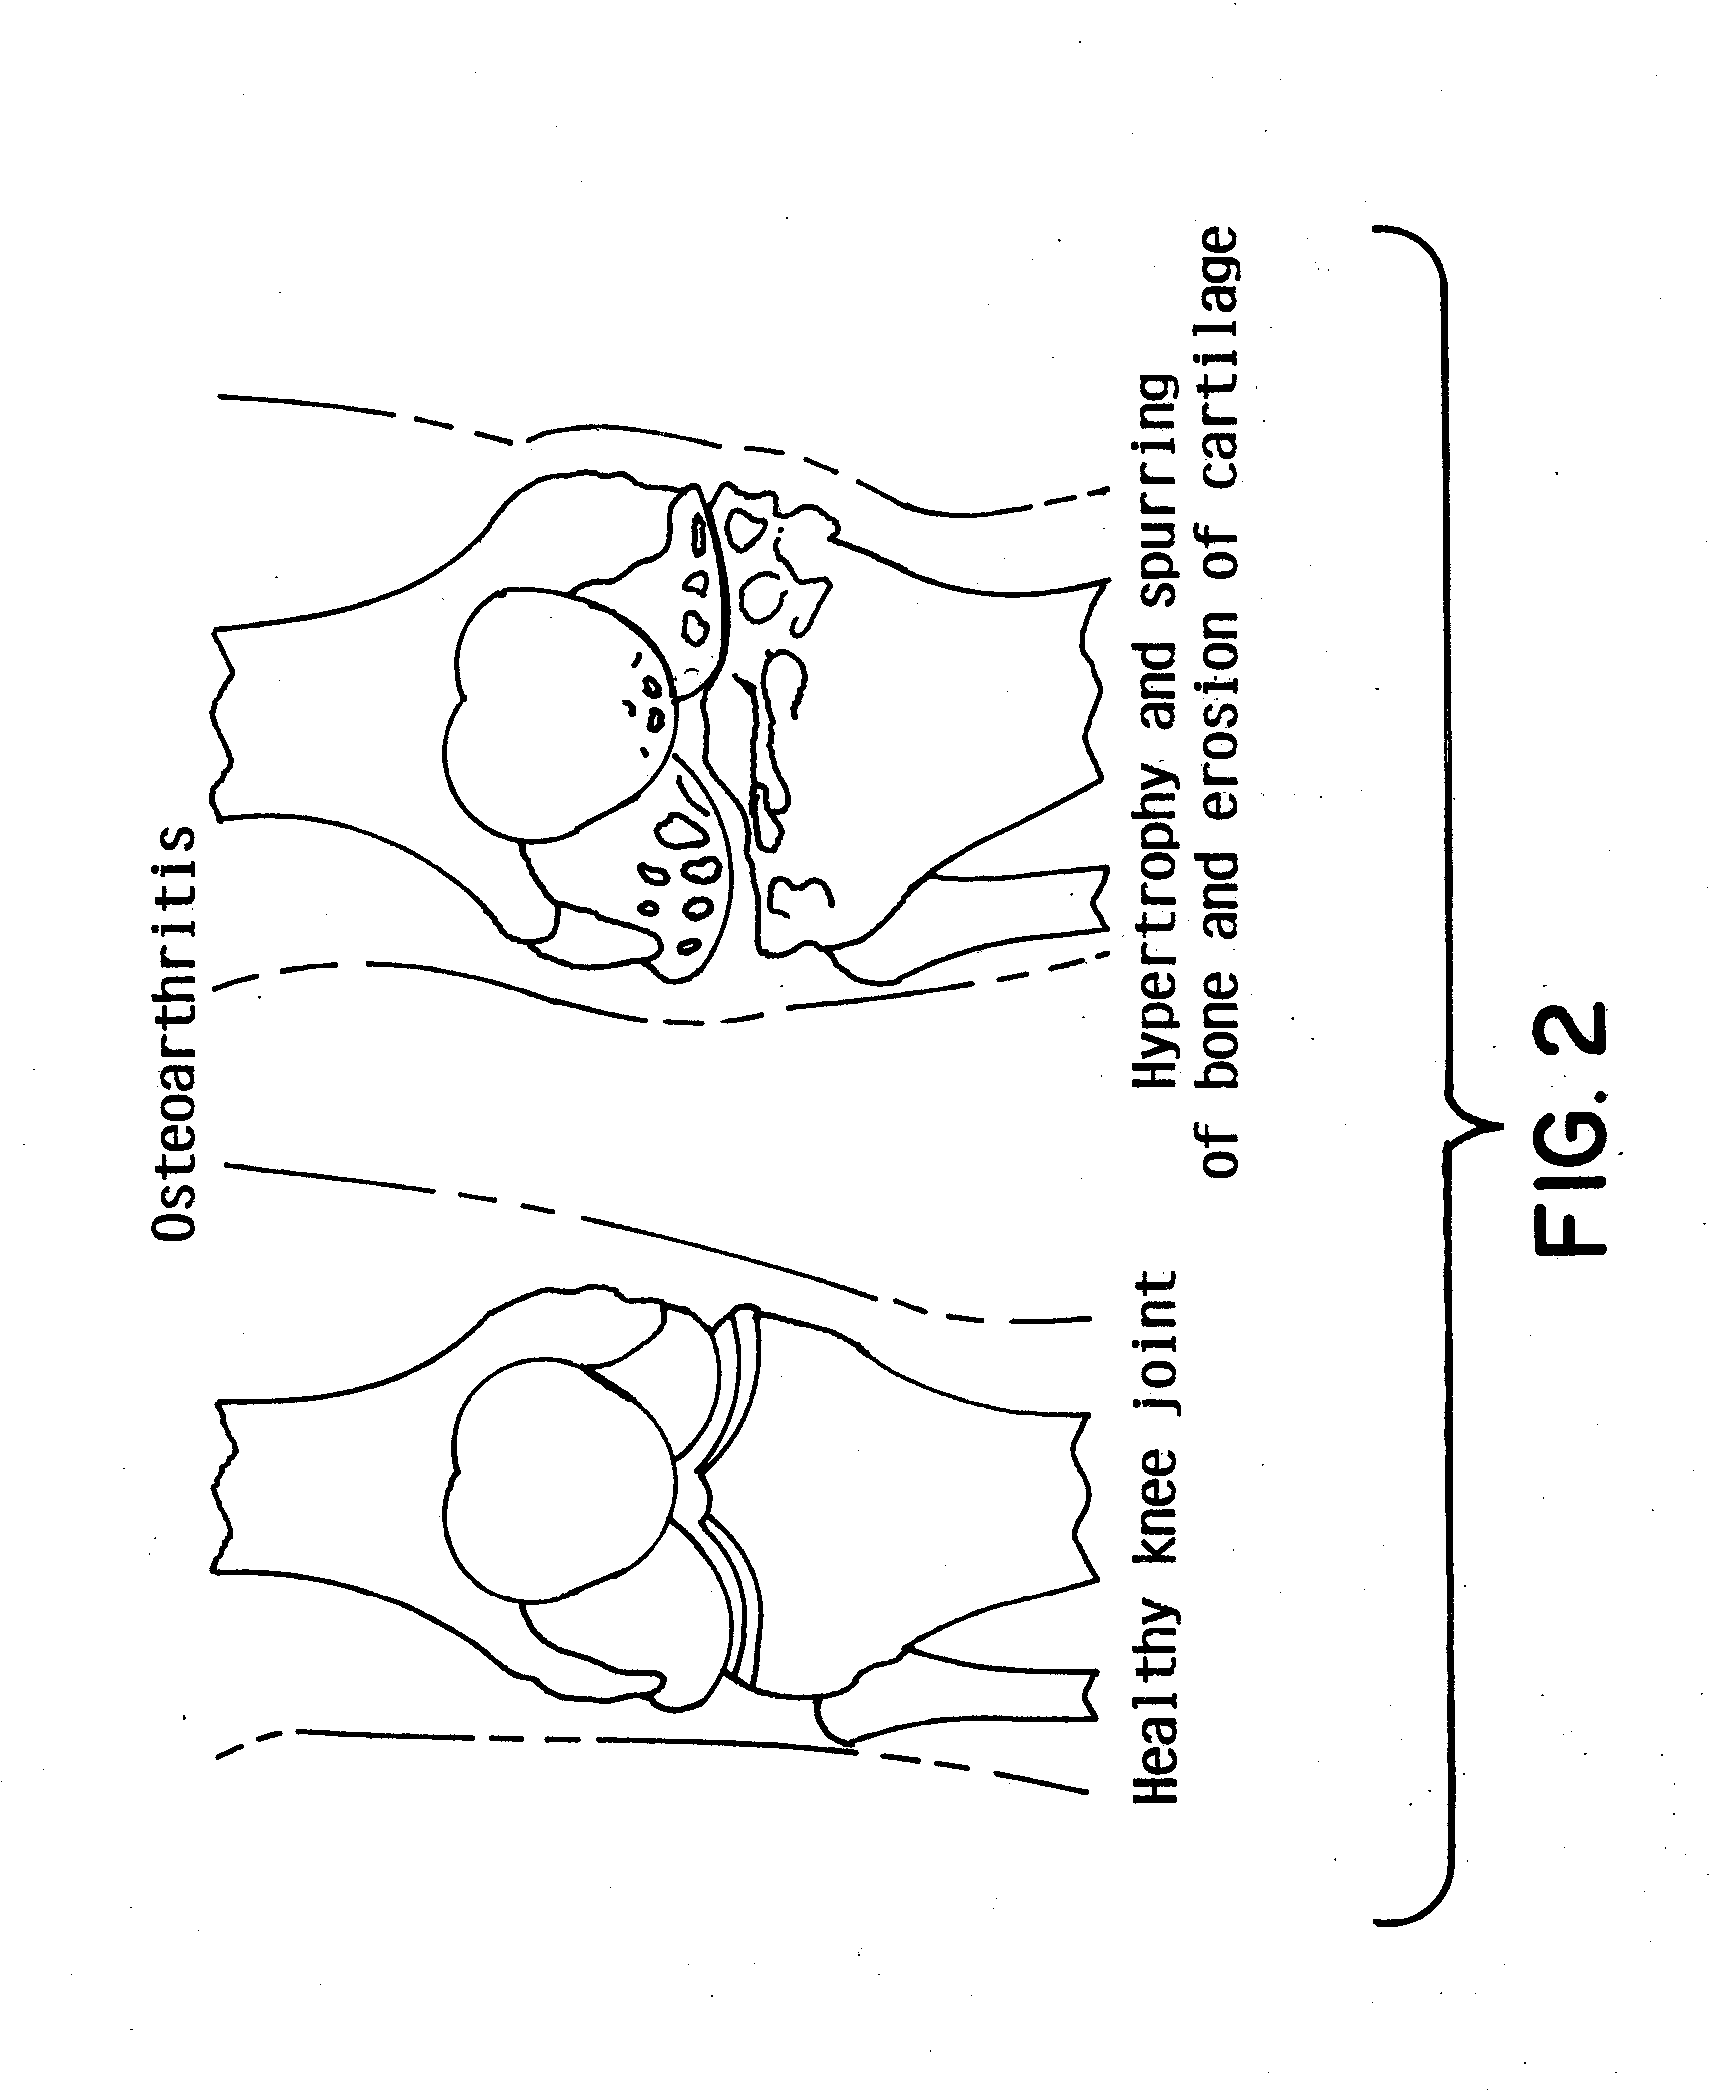 Low friction resurfacing implant